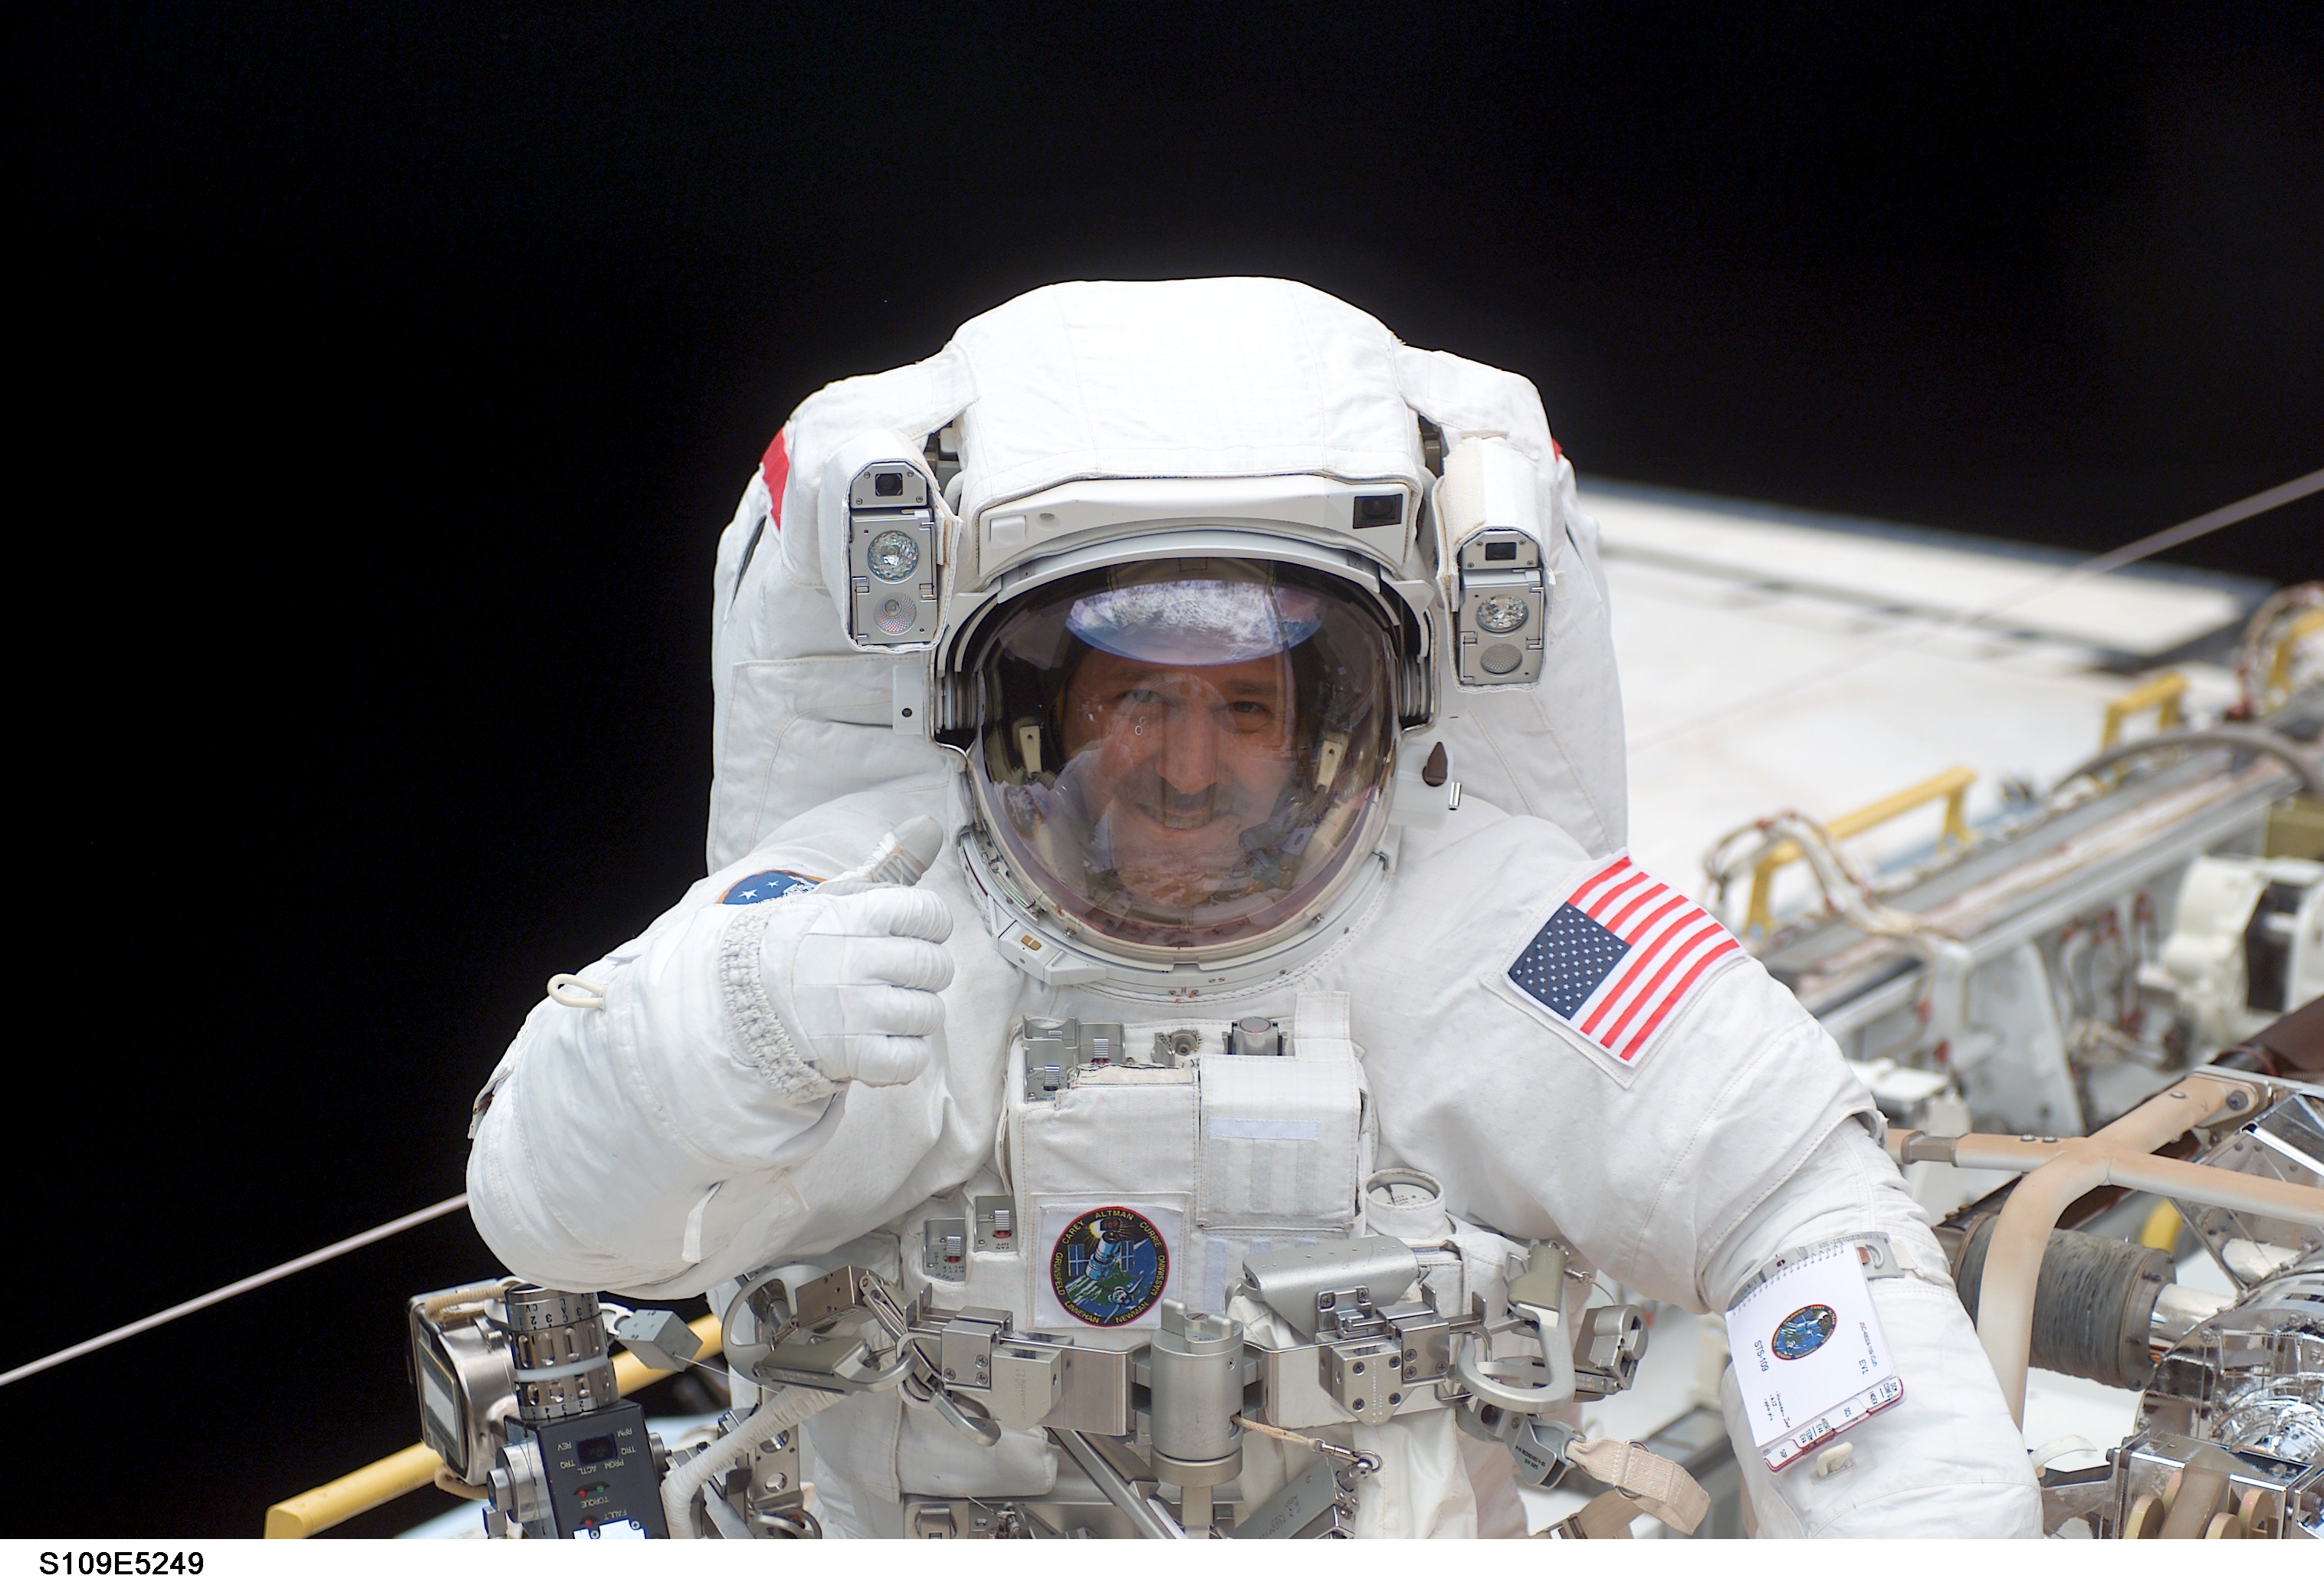 John Grunsfeld stands in his spacesuit during a Space Shuttle mission. He is giving the thumbs up and smiling for the camera.